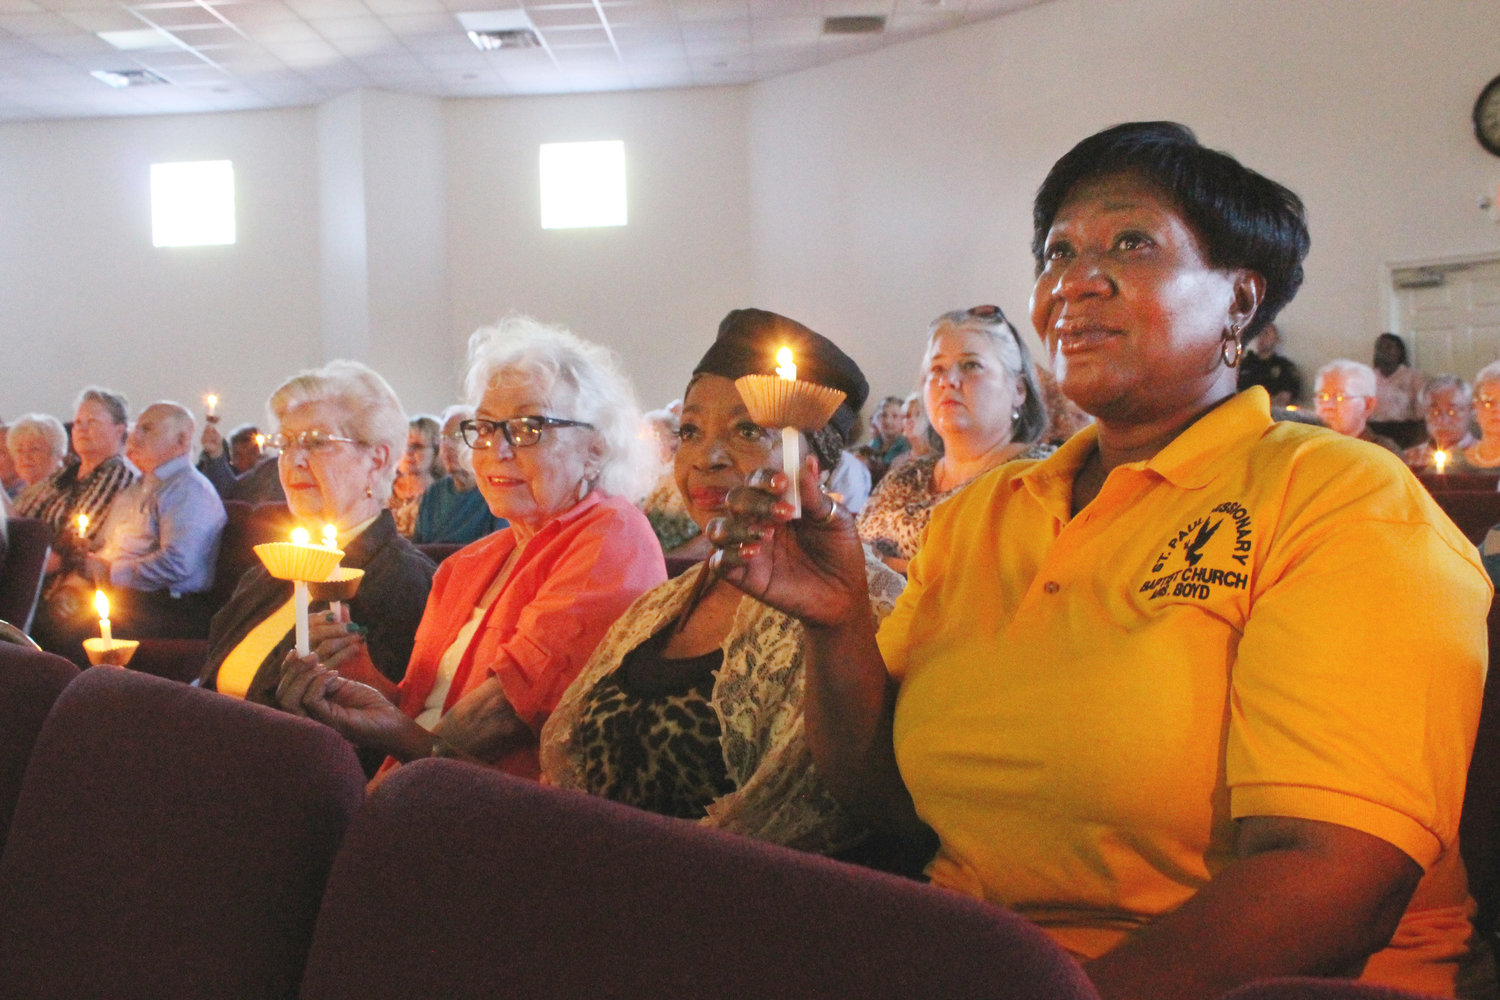 Gwen Stirman, Claudene Sublett, Brenda Beedles and Kathy Boyd reflect on the reason for the Community Prayer Vigil Sunday evening at St. Paul Baptist Church. Kathy Elmore is seated behind them and her face also shows the solemnity of the occasion. (Monitor photos by Doris Newman)